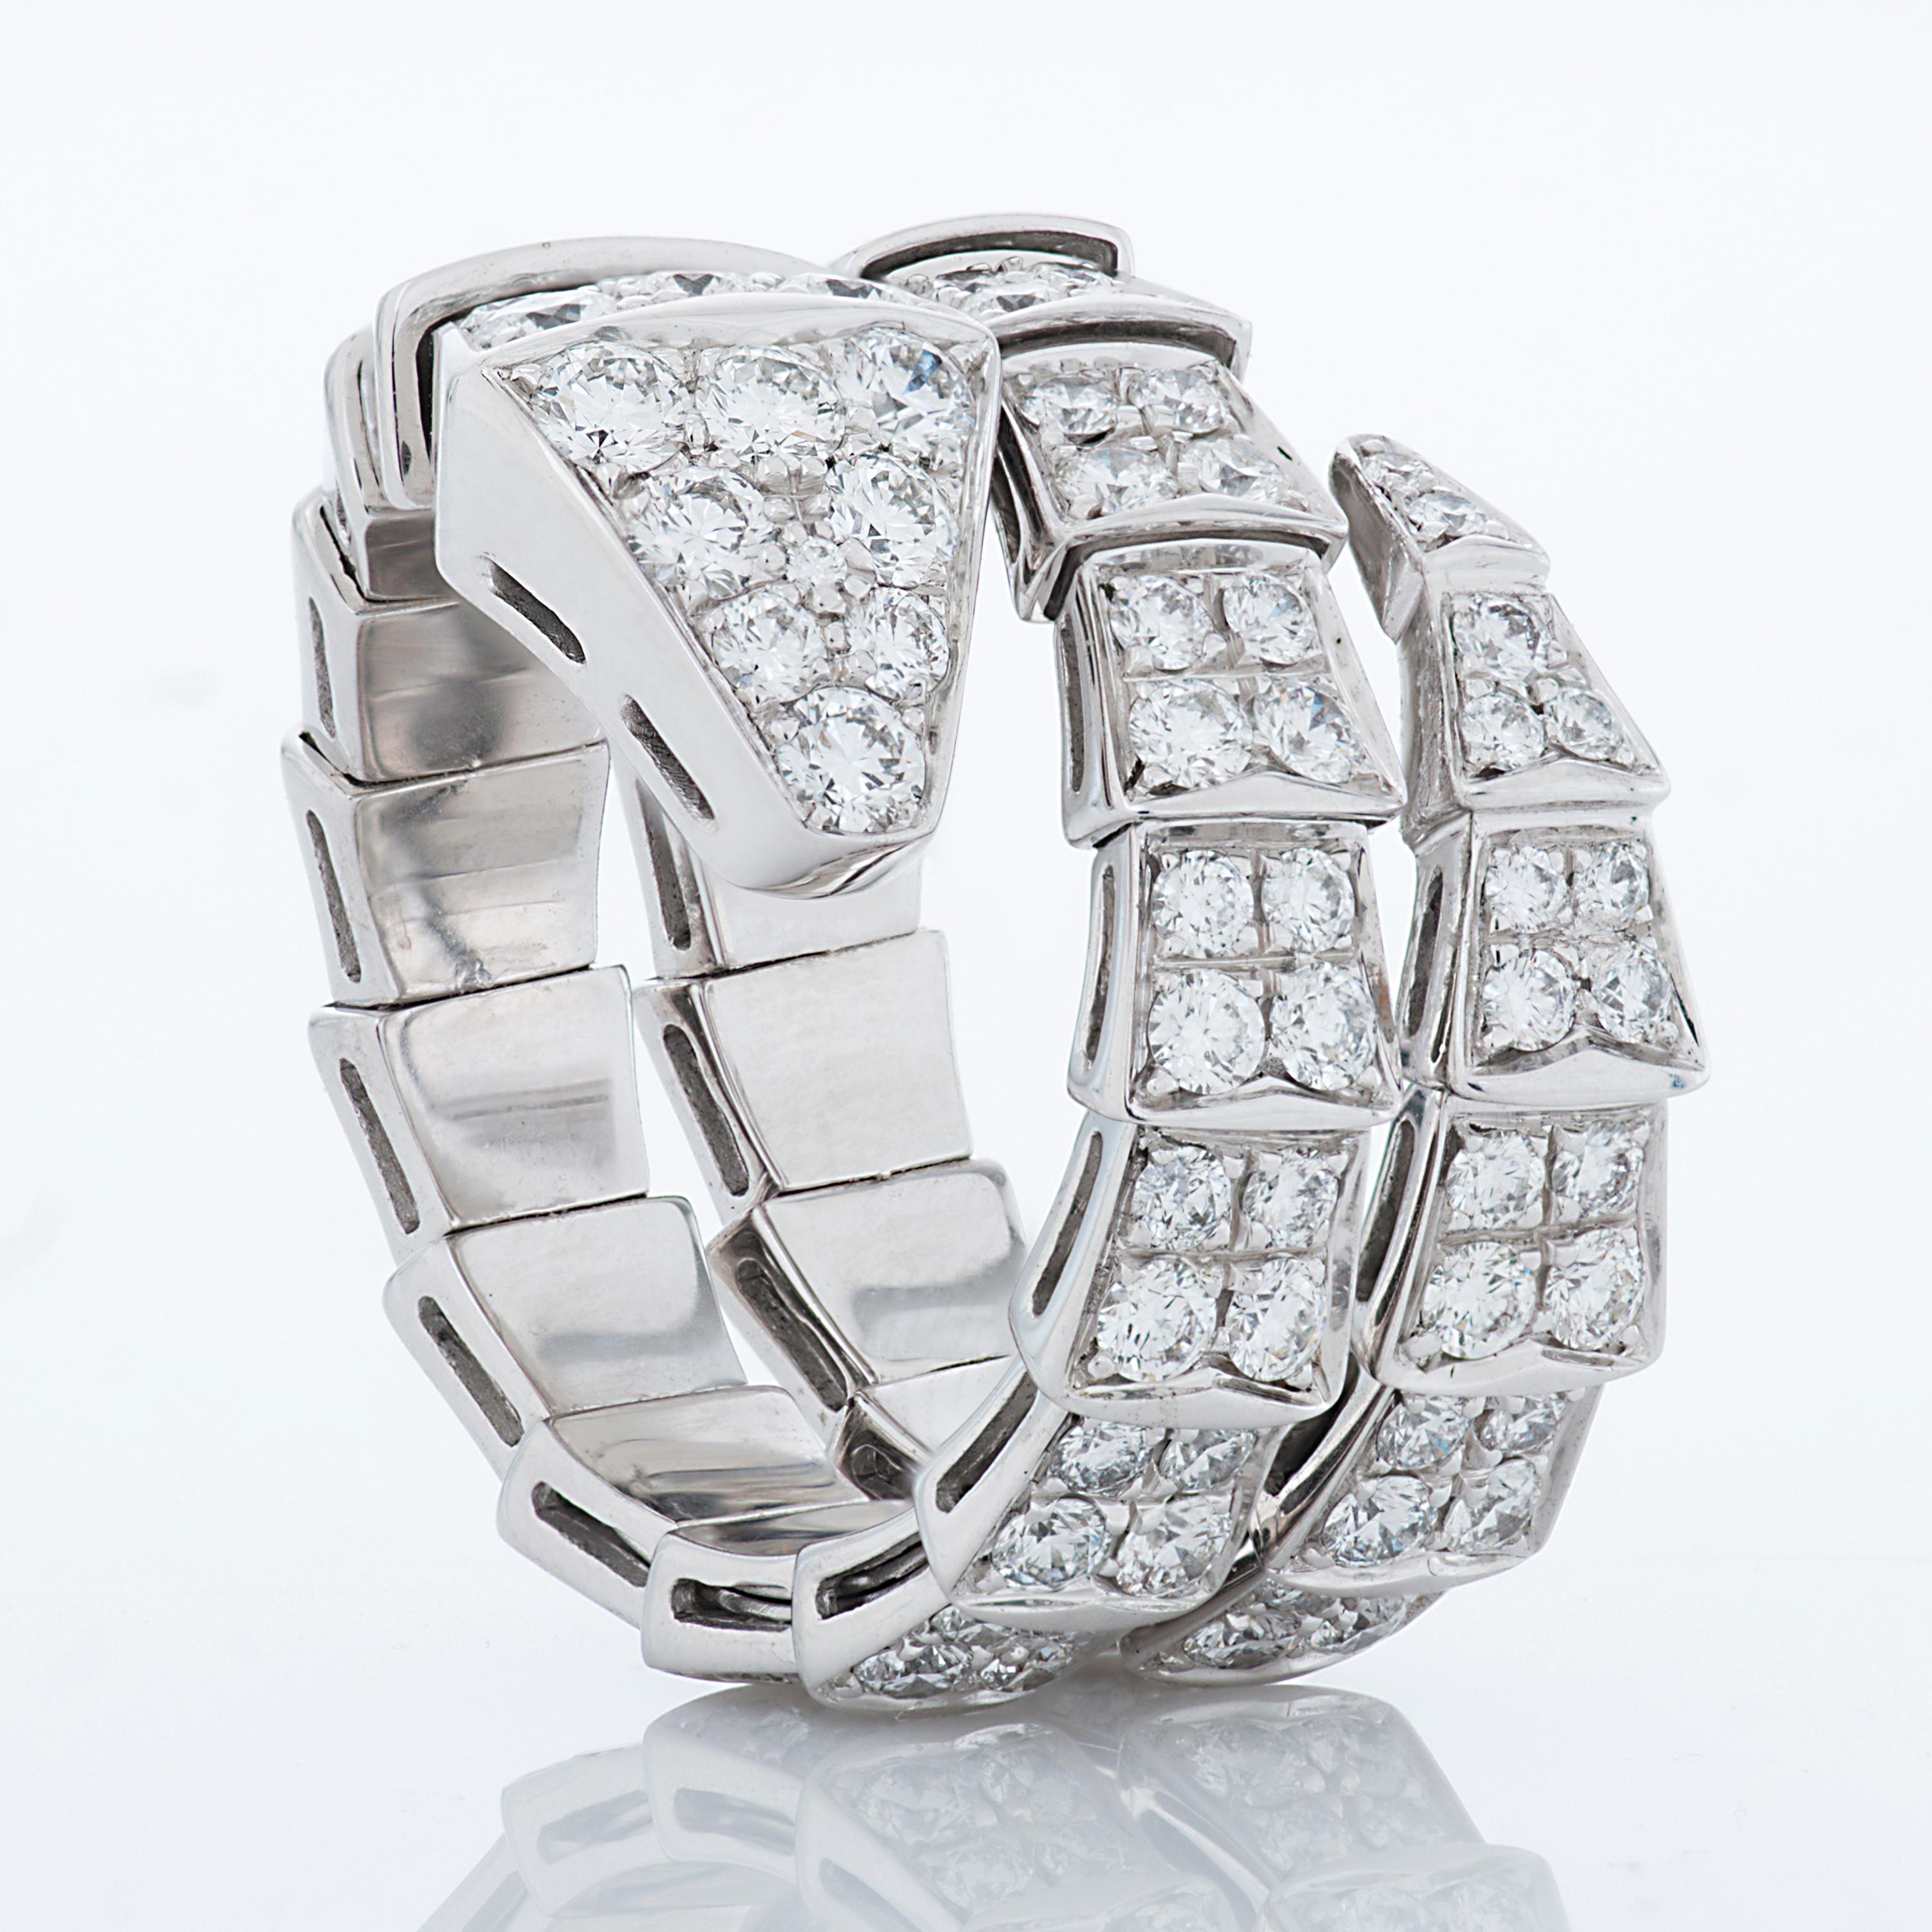 Bvlgari Serpenti double coil viper ring in 18k white gold.

This Bvlgari snake ring from the Serpenti Viper collection features approximately 2.77 carat of round brilliant cut diamonds pave set in 18k white gold. 

Size Medium, flexible.  Fits